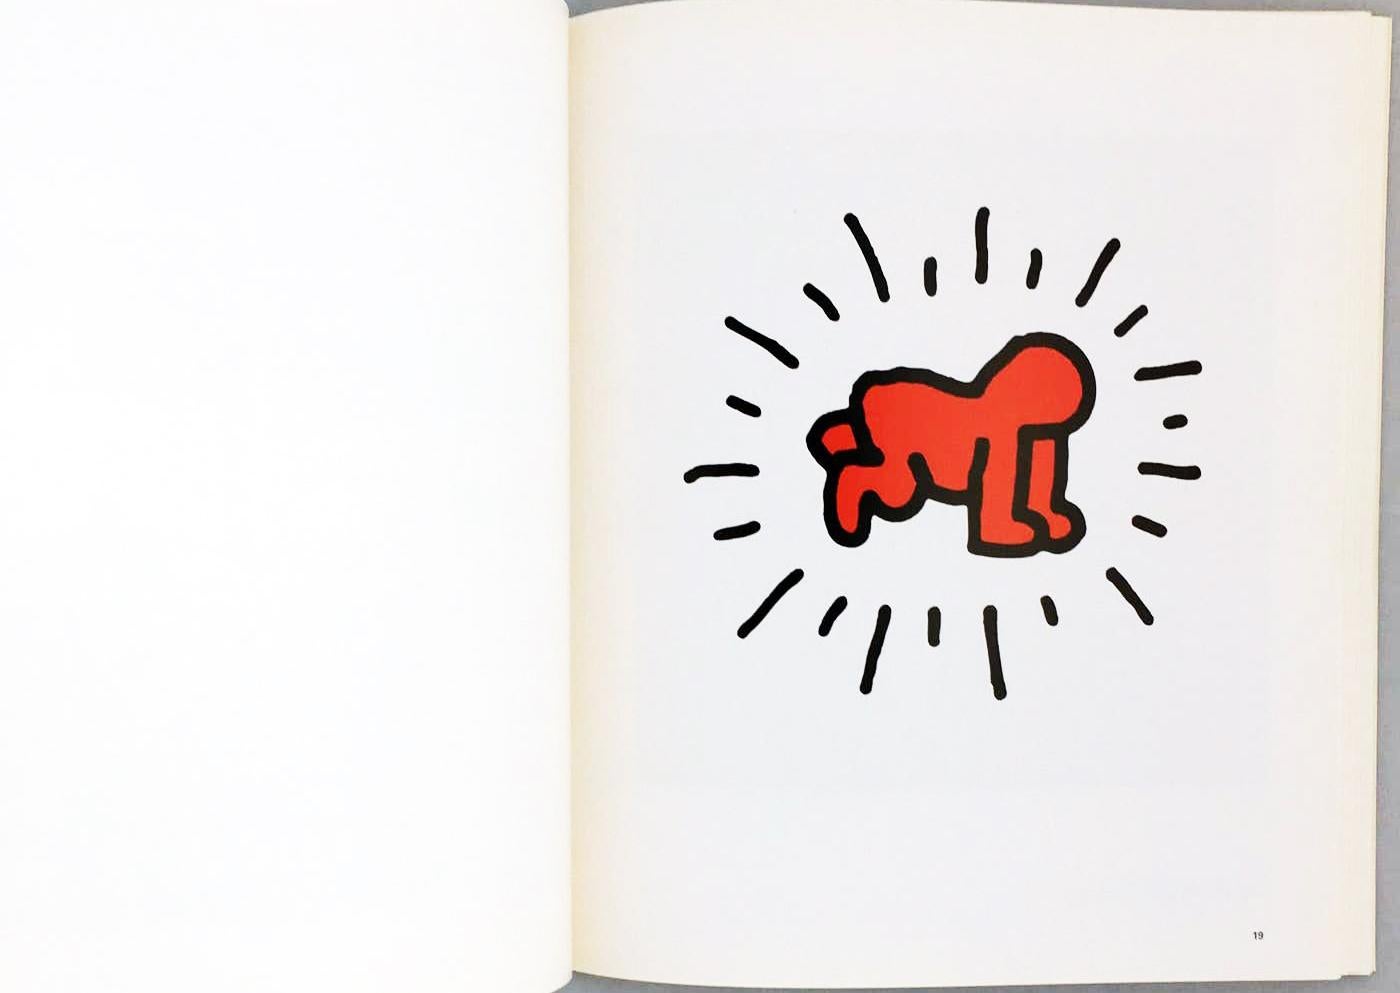 Kenny Scharf book drawing 1998 (Basquiat Keith Haring Kenny Scharf Lio Malca) For Sale 3